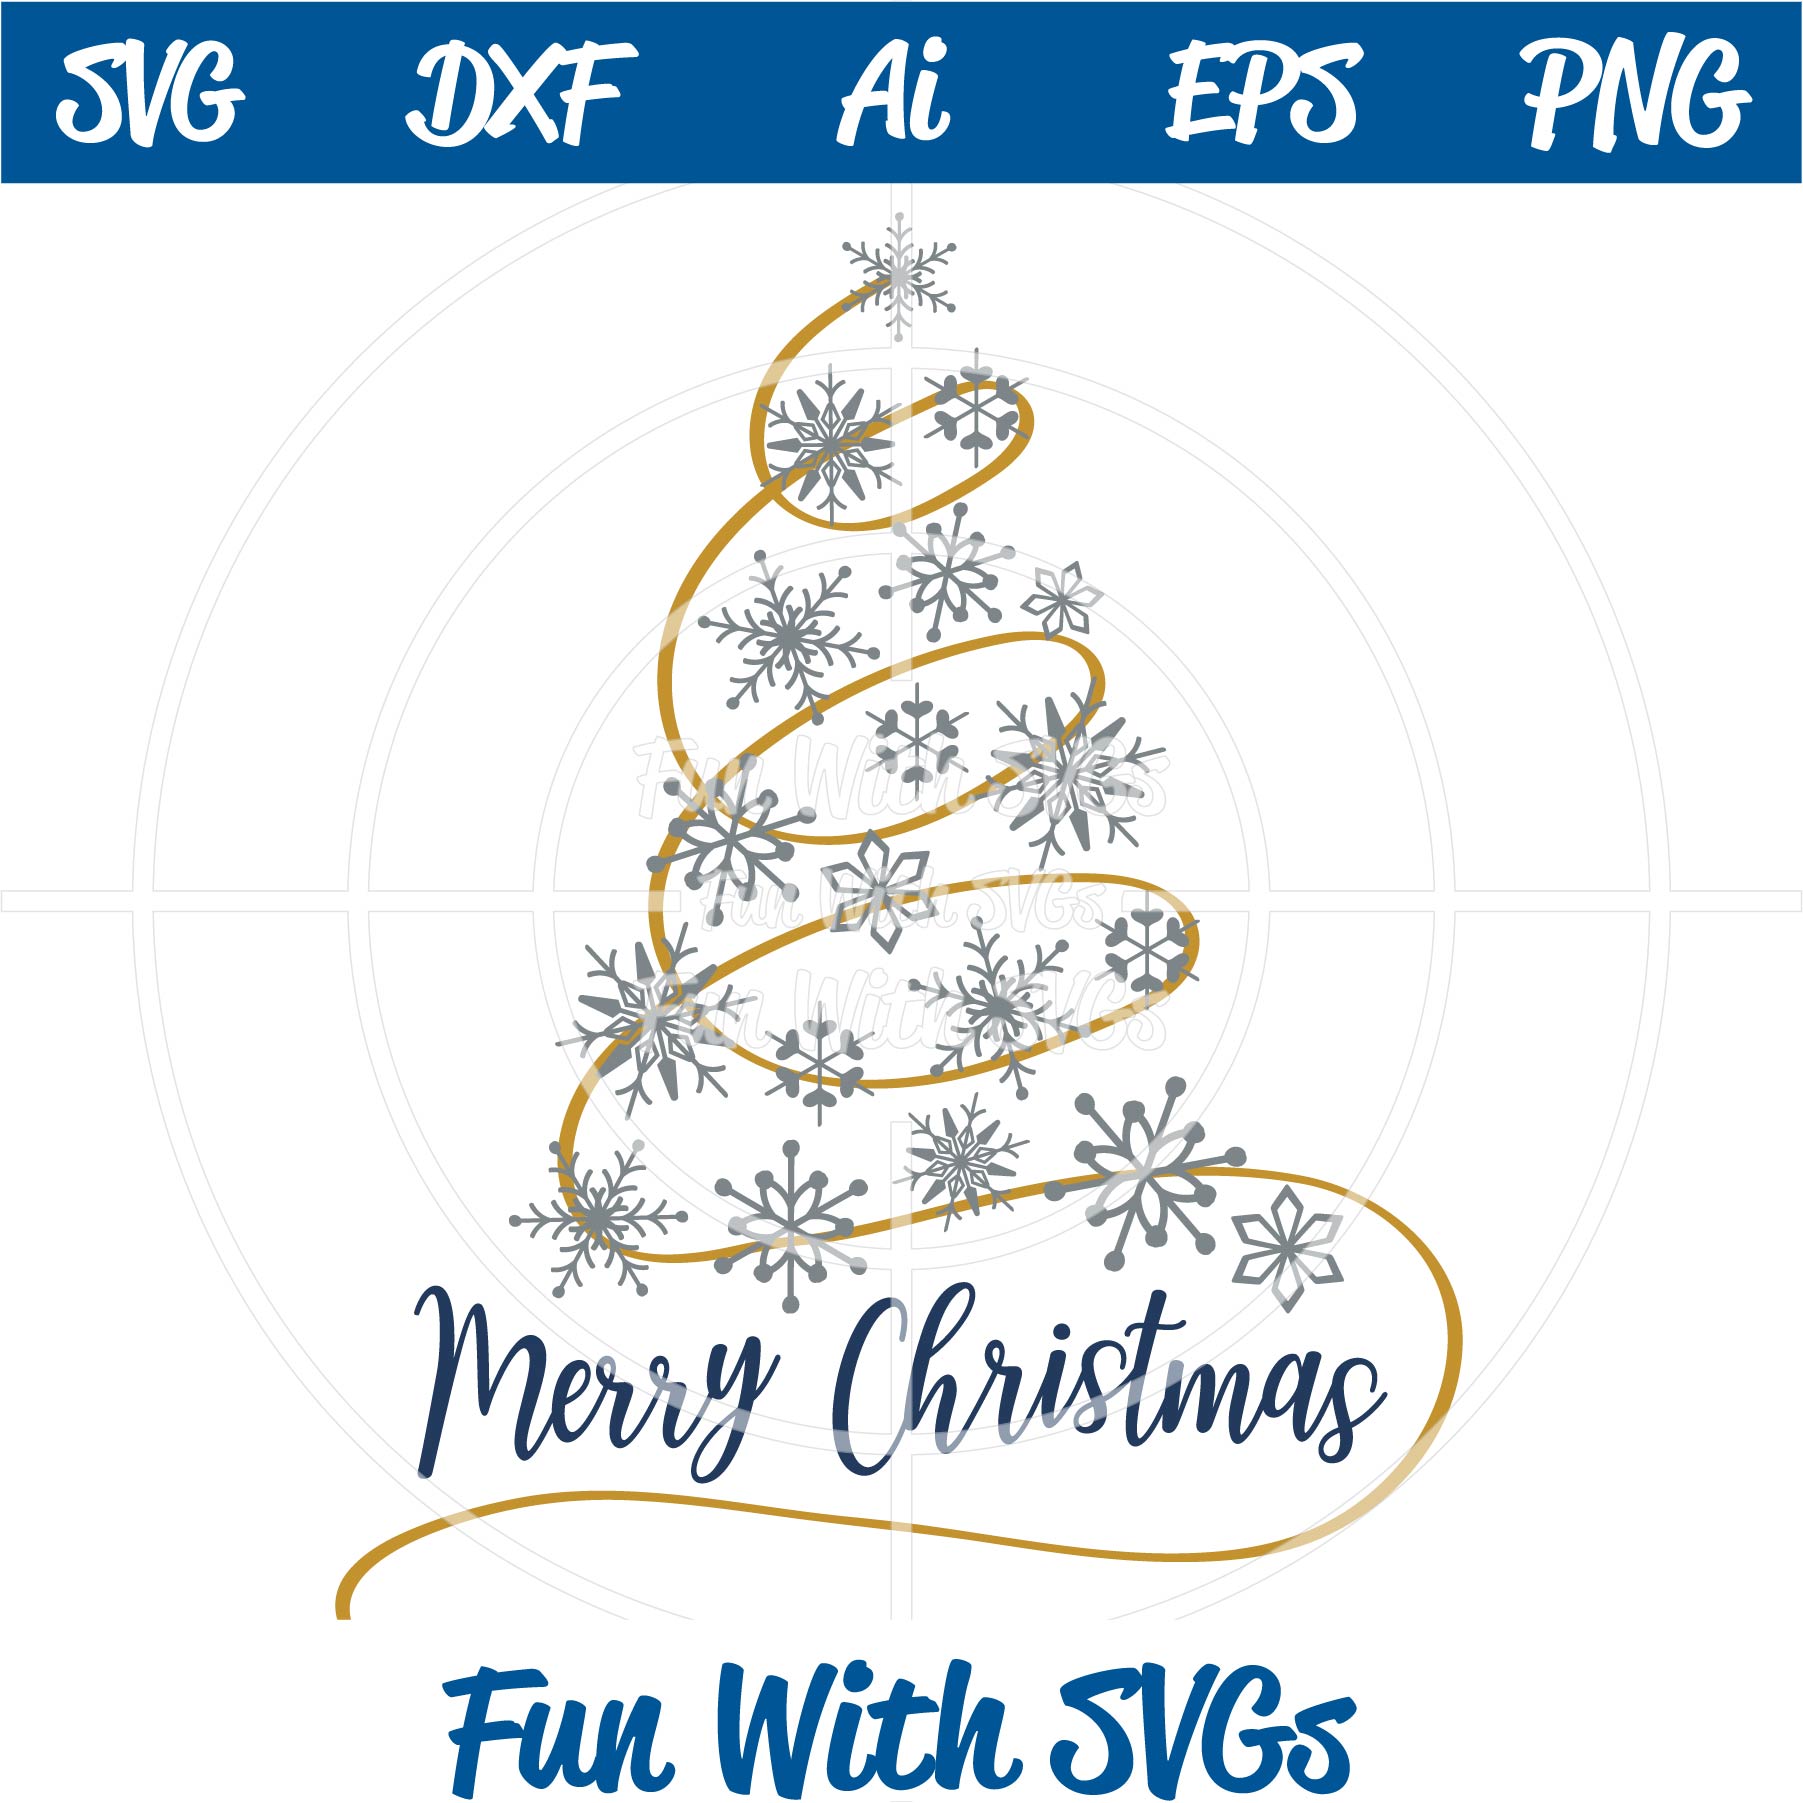 Download Snowflake Christmas Tree SVG Cut File ~ Fun With SVGs